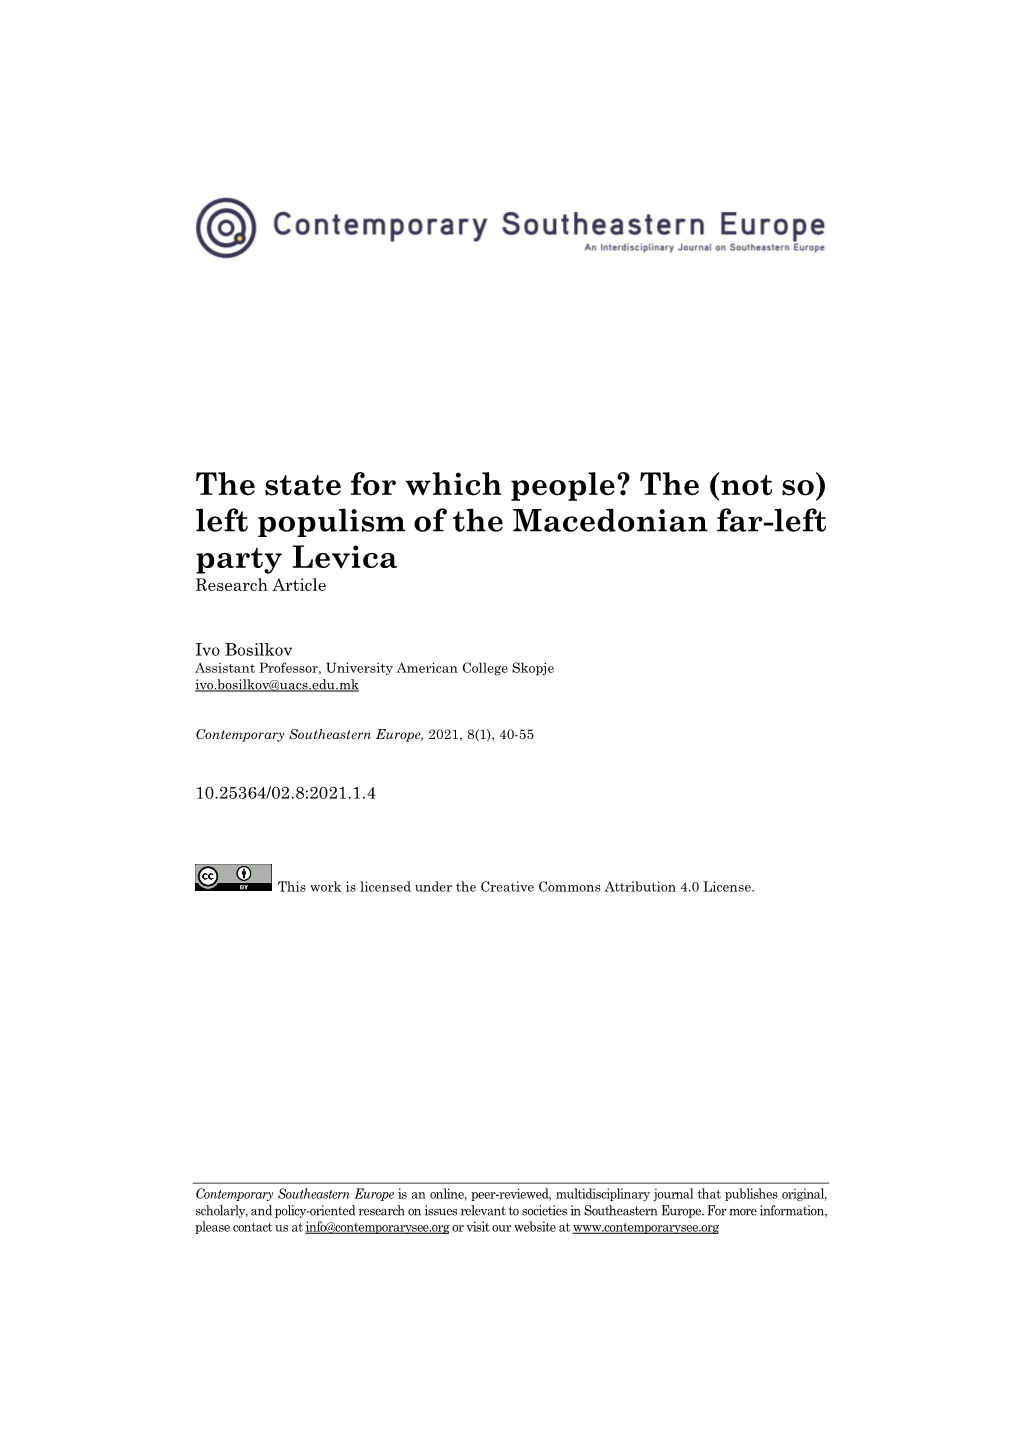 Left Populism of the Macedonian Far-Left Party Levica Research Article